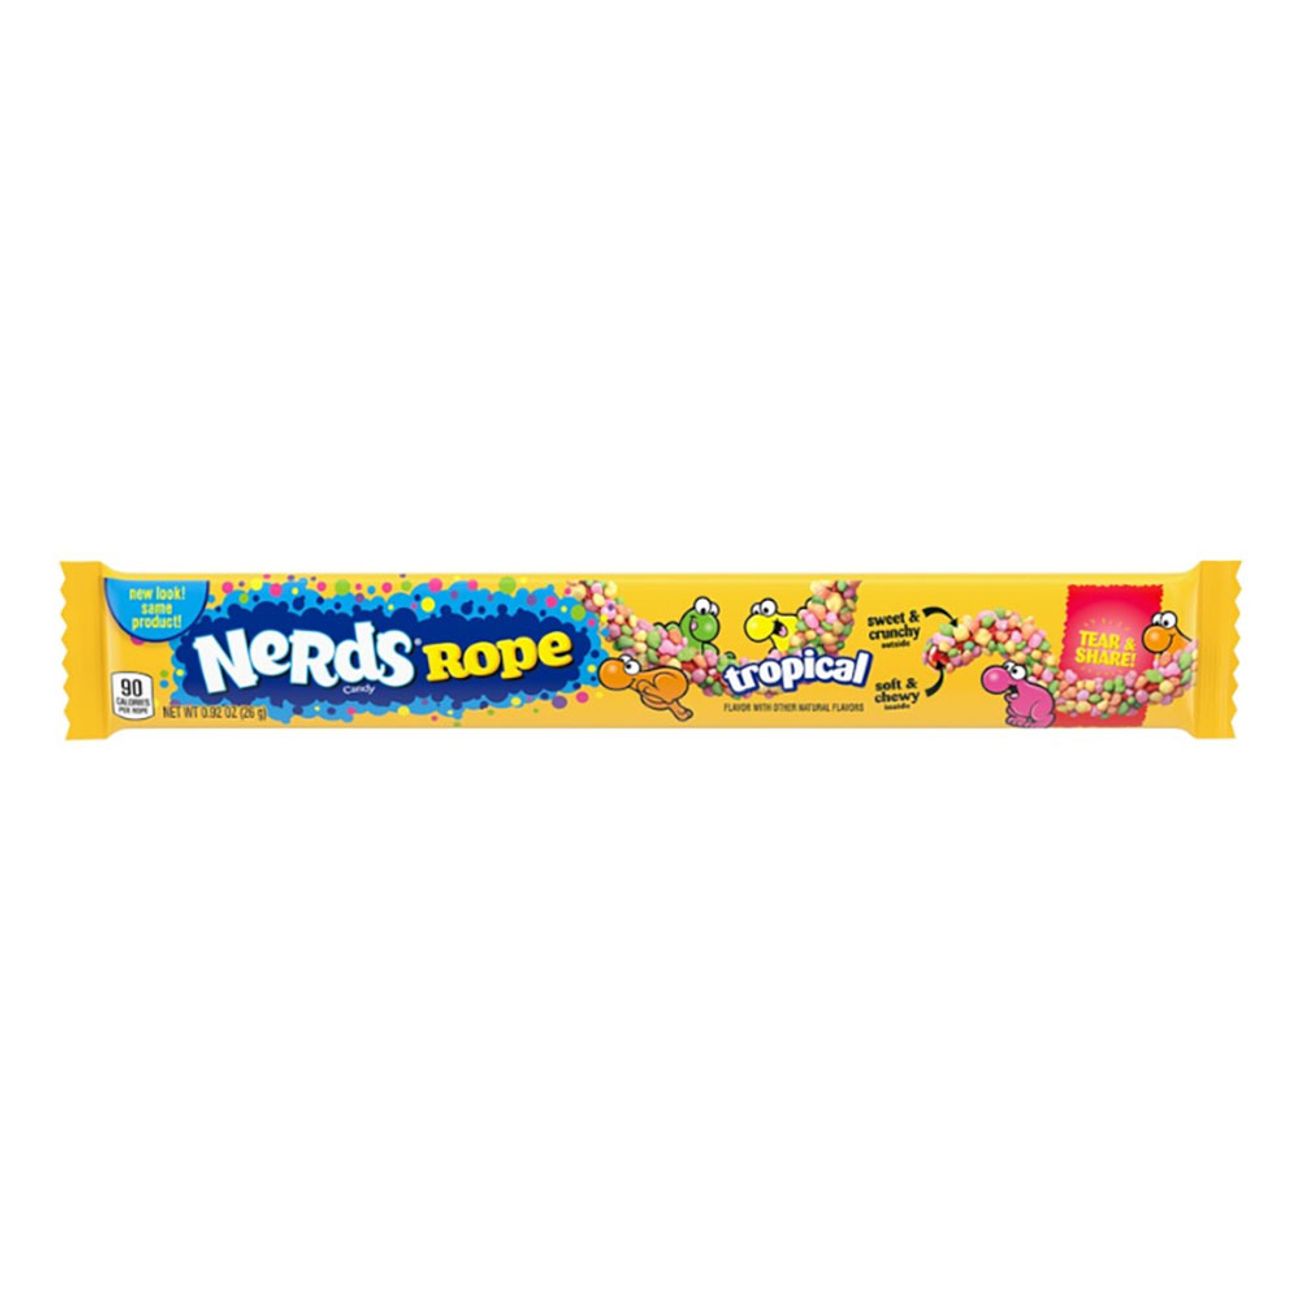 nerds-rope-tropical-26g-82980-1